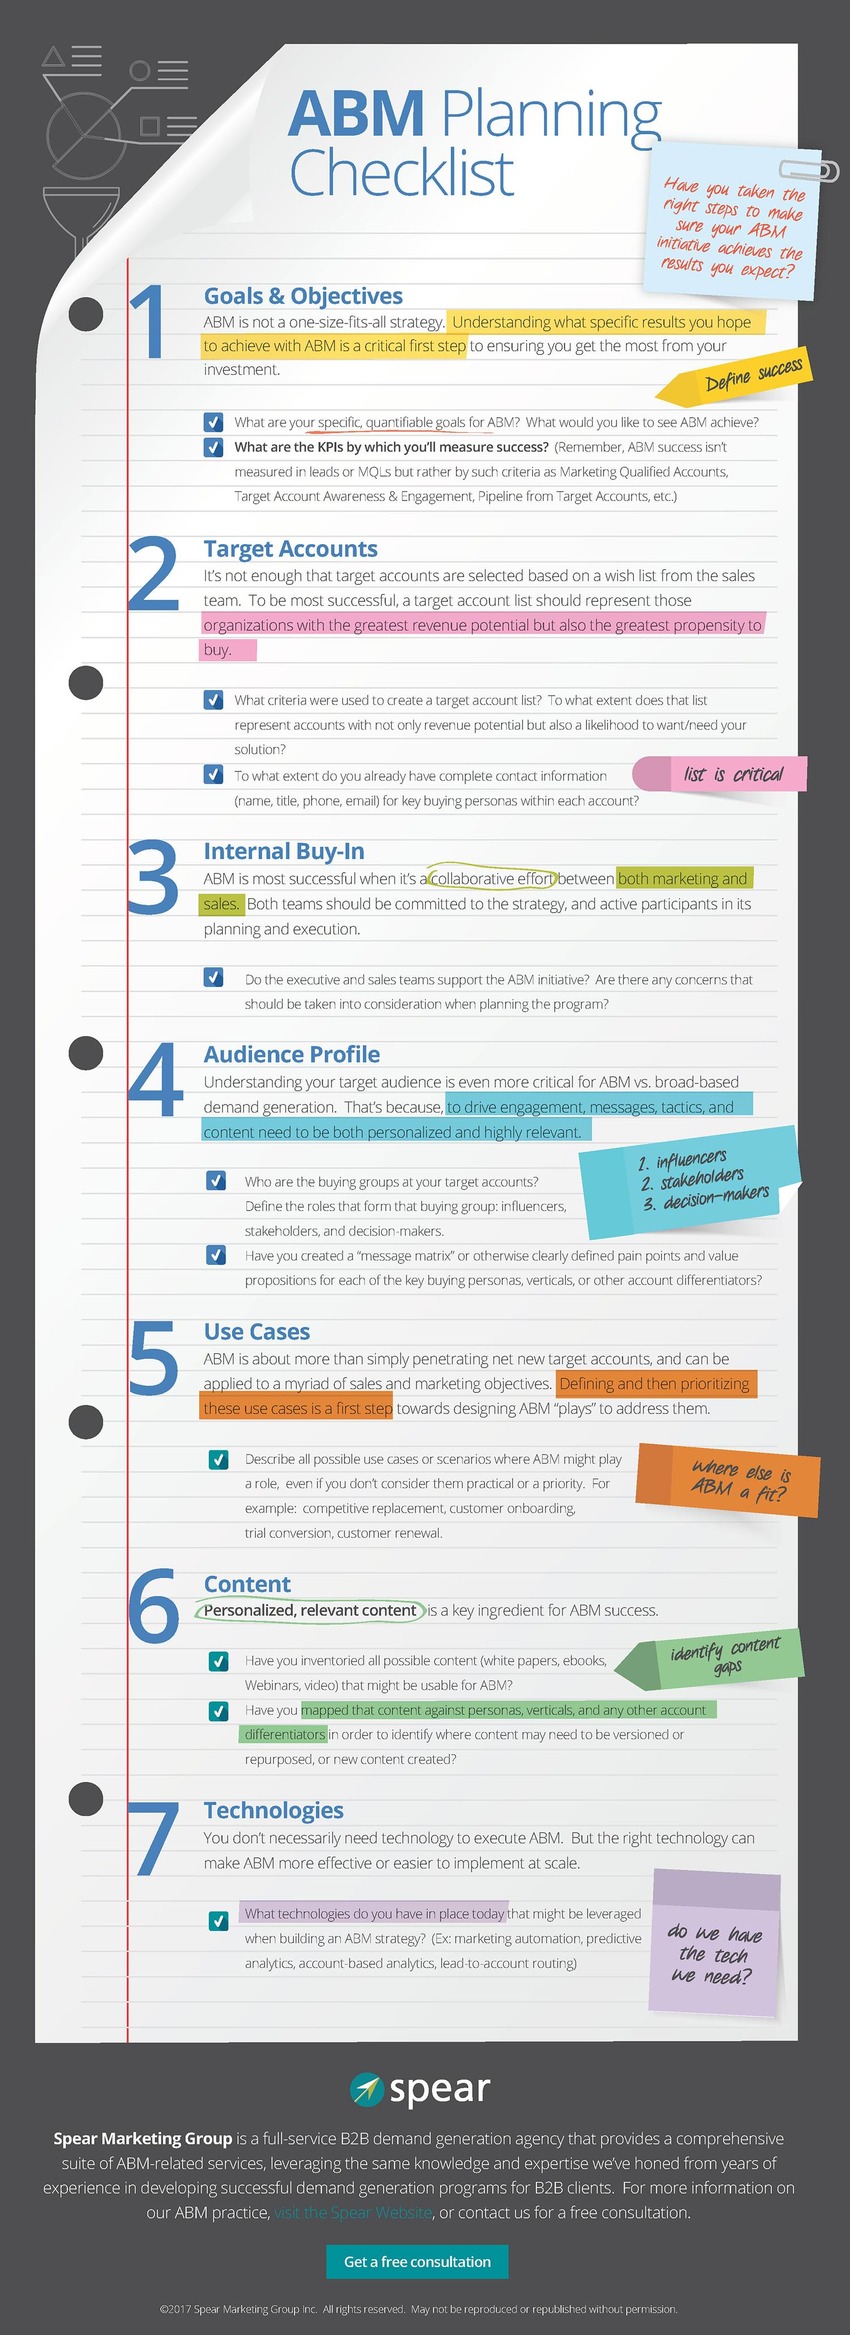 Infographic: An ABM Planning Checklist - The Point | The MarTech Digest | Scoop.it